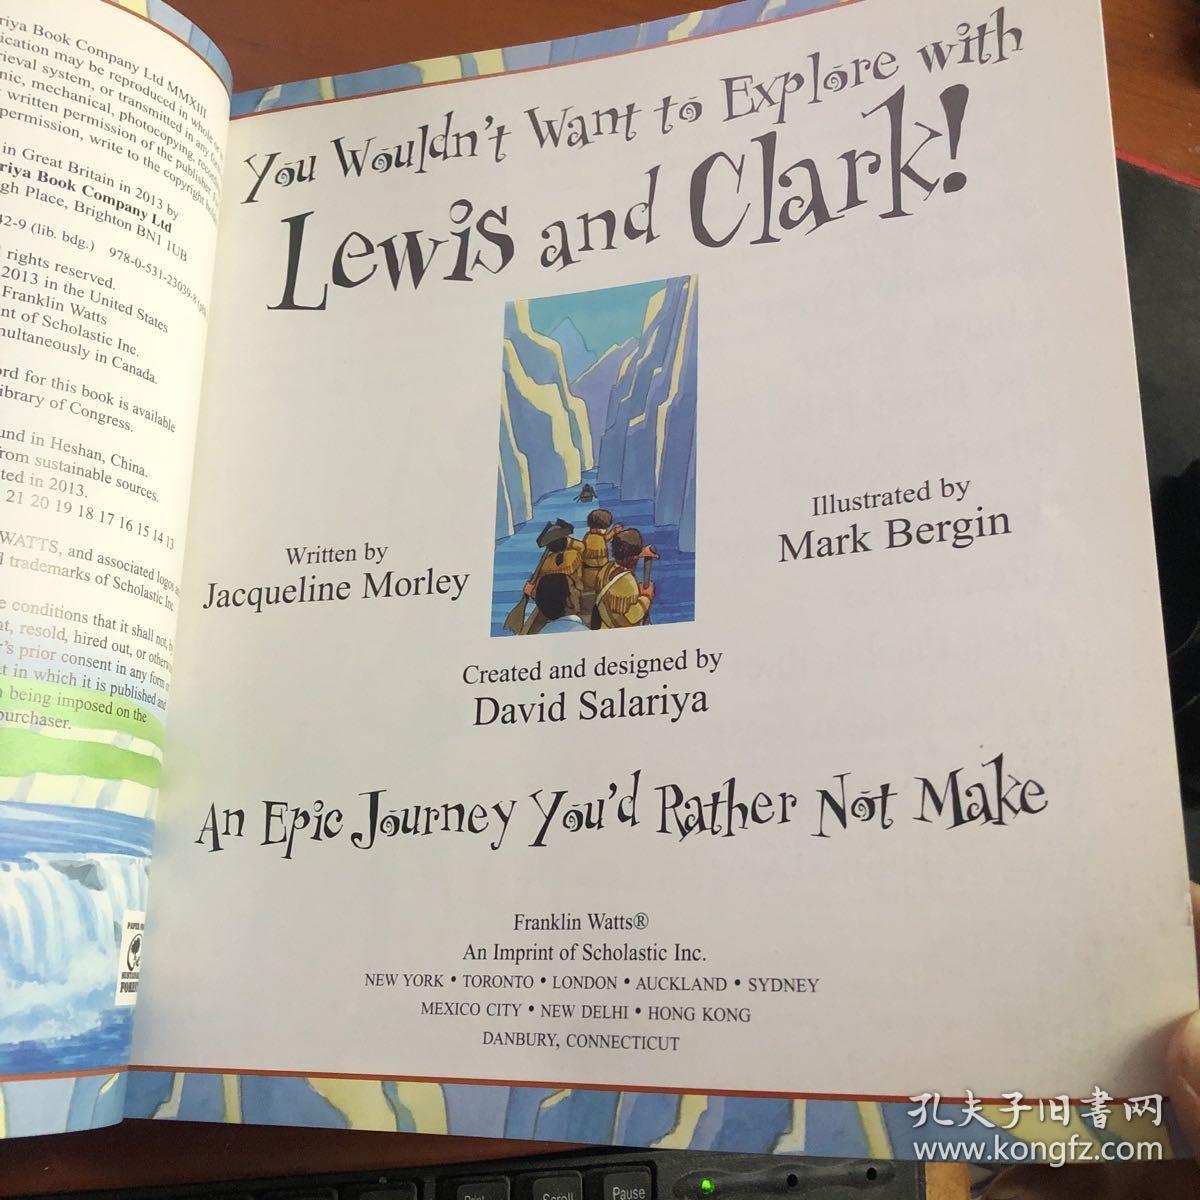 You Wouldn't Want to Explore with Lewis and Clark!